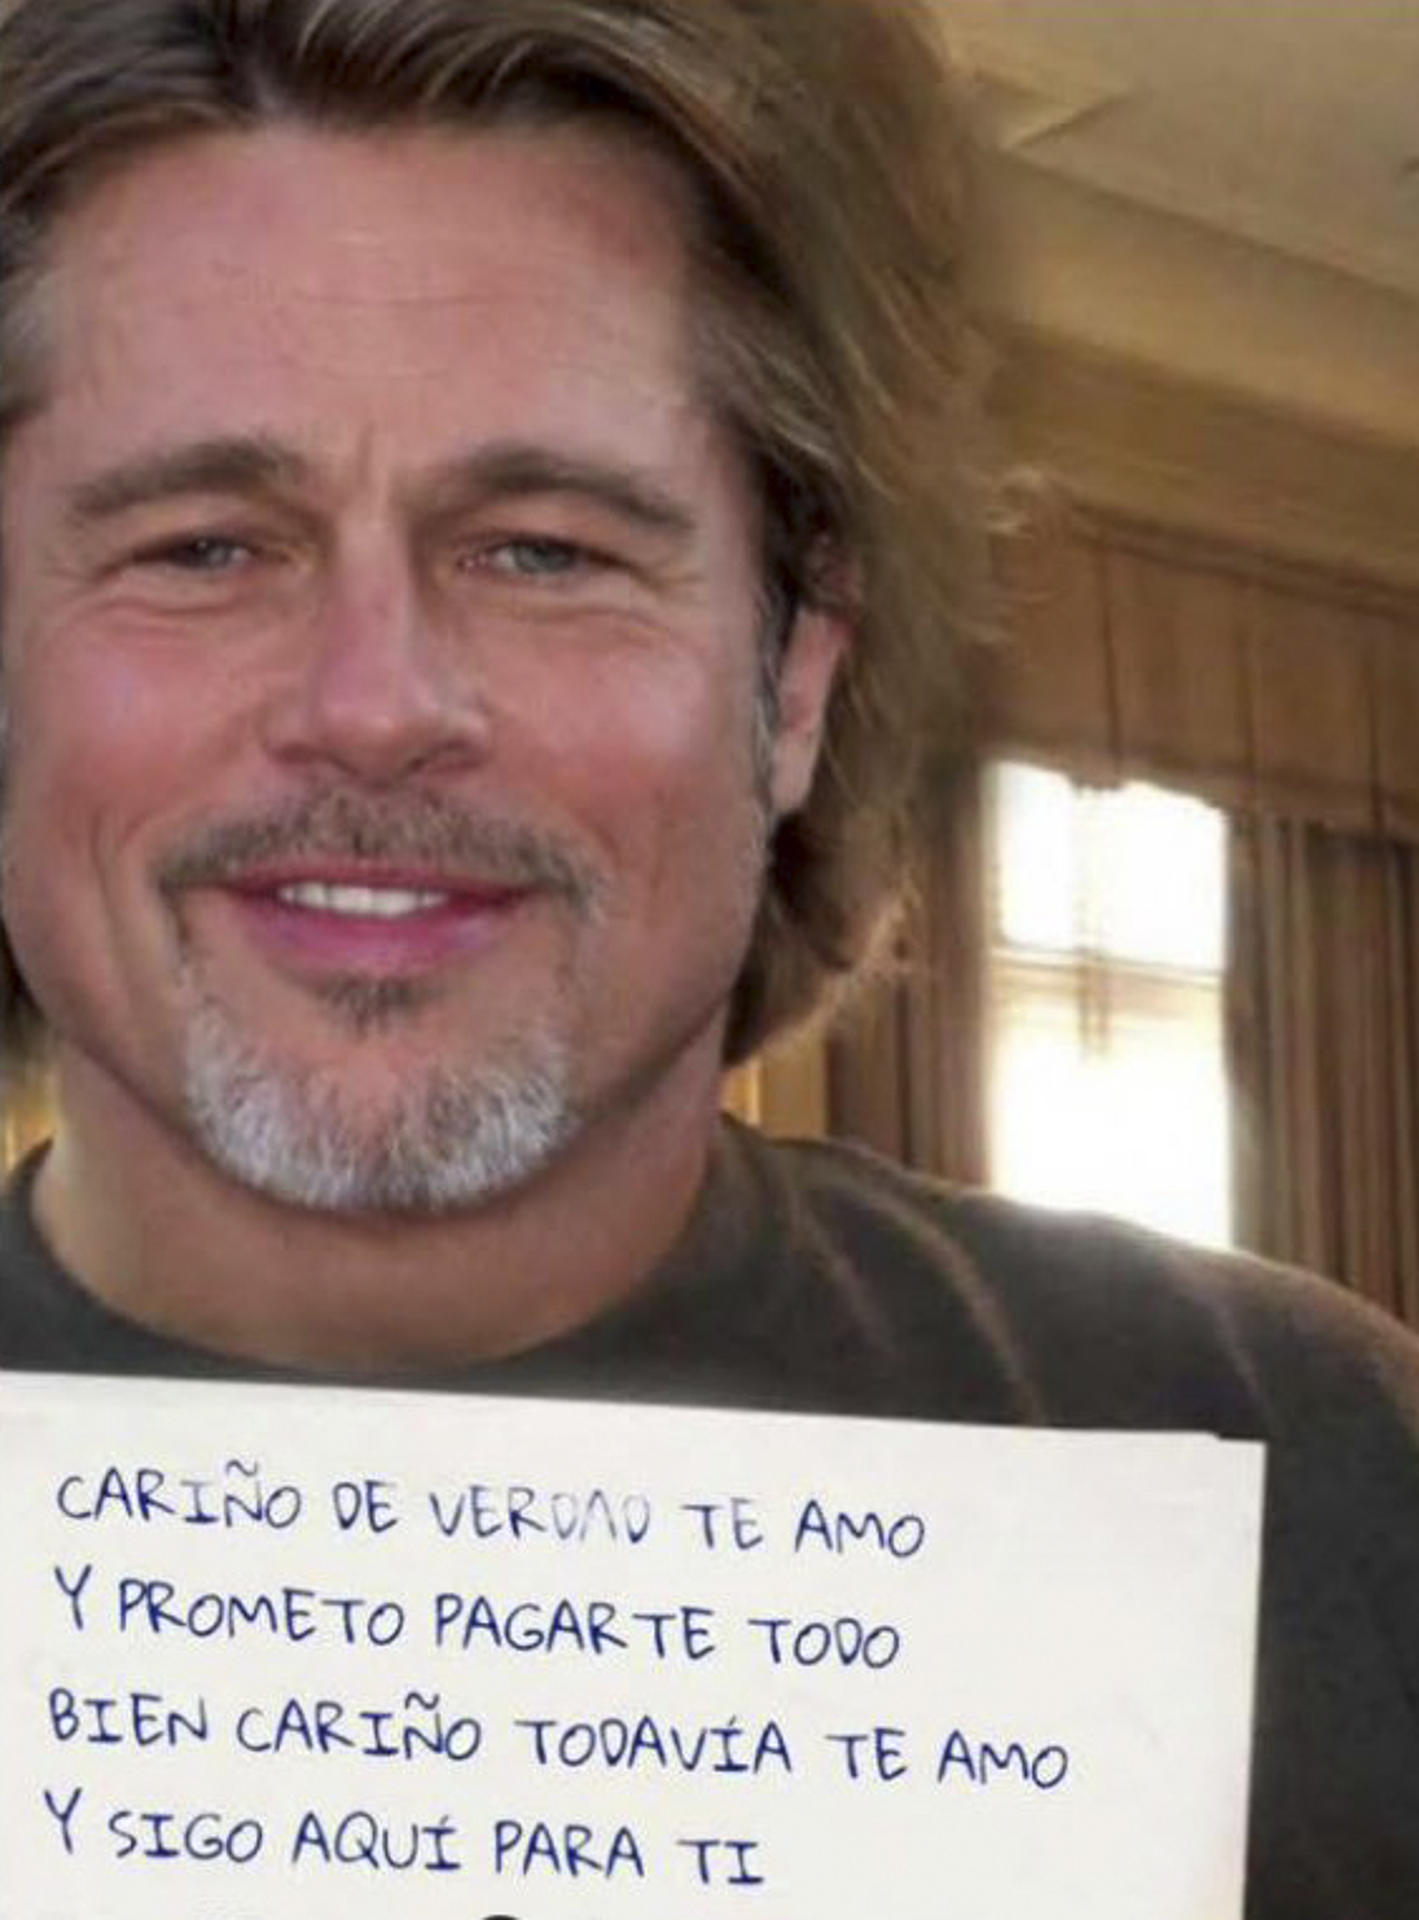 A handout photo filed in a lawsuit by a Spanish women who was allegedly scammed out of at least 170,000 euros by someone posing online as American actor Brad Pitt, Granada, Spain, 29 June 2023. EFE/HANDOUT